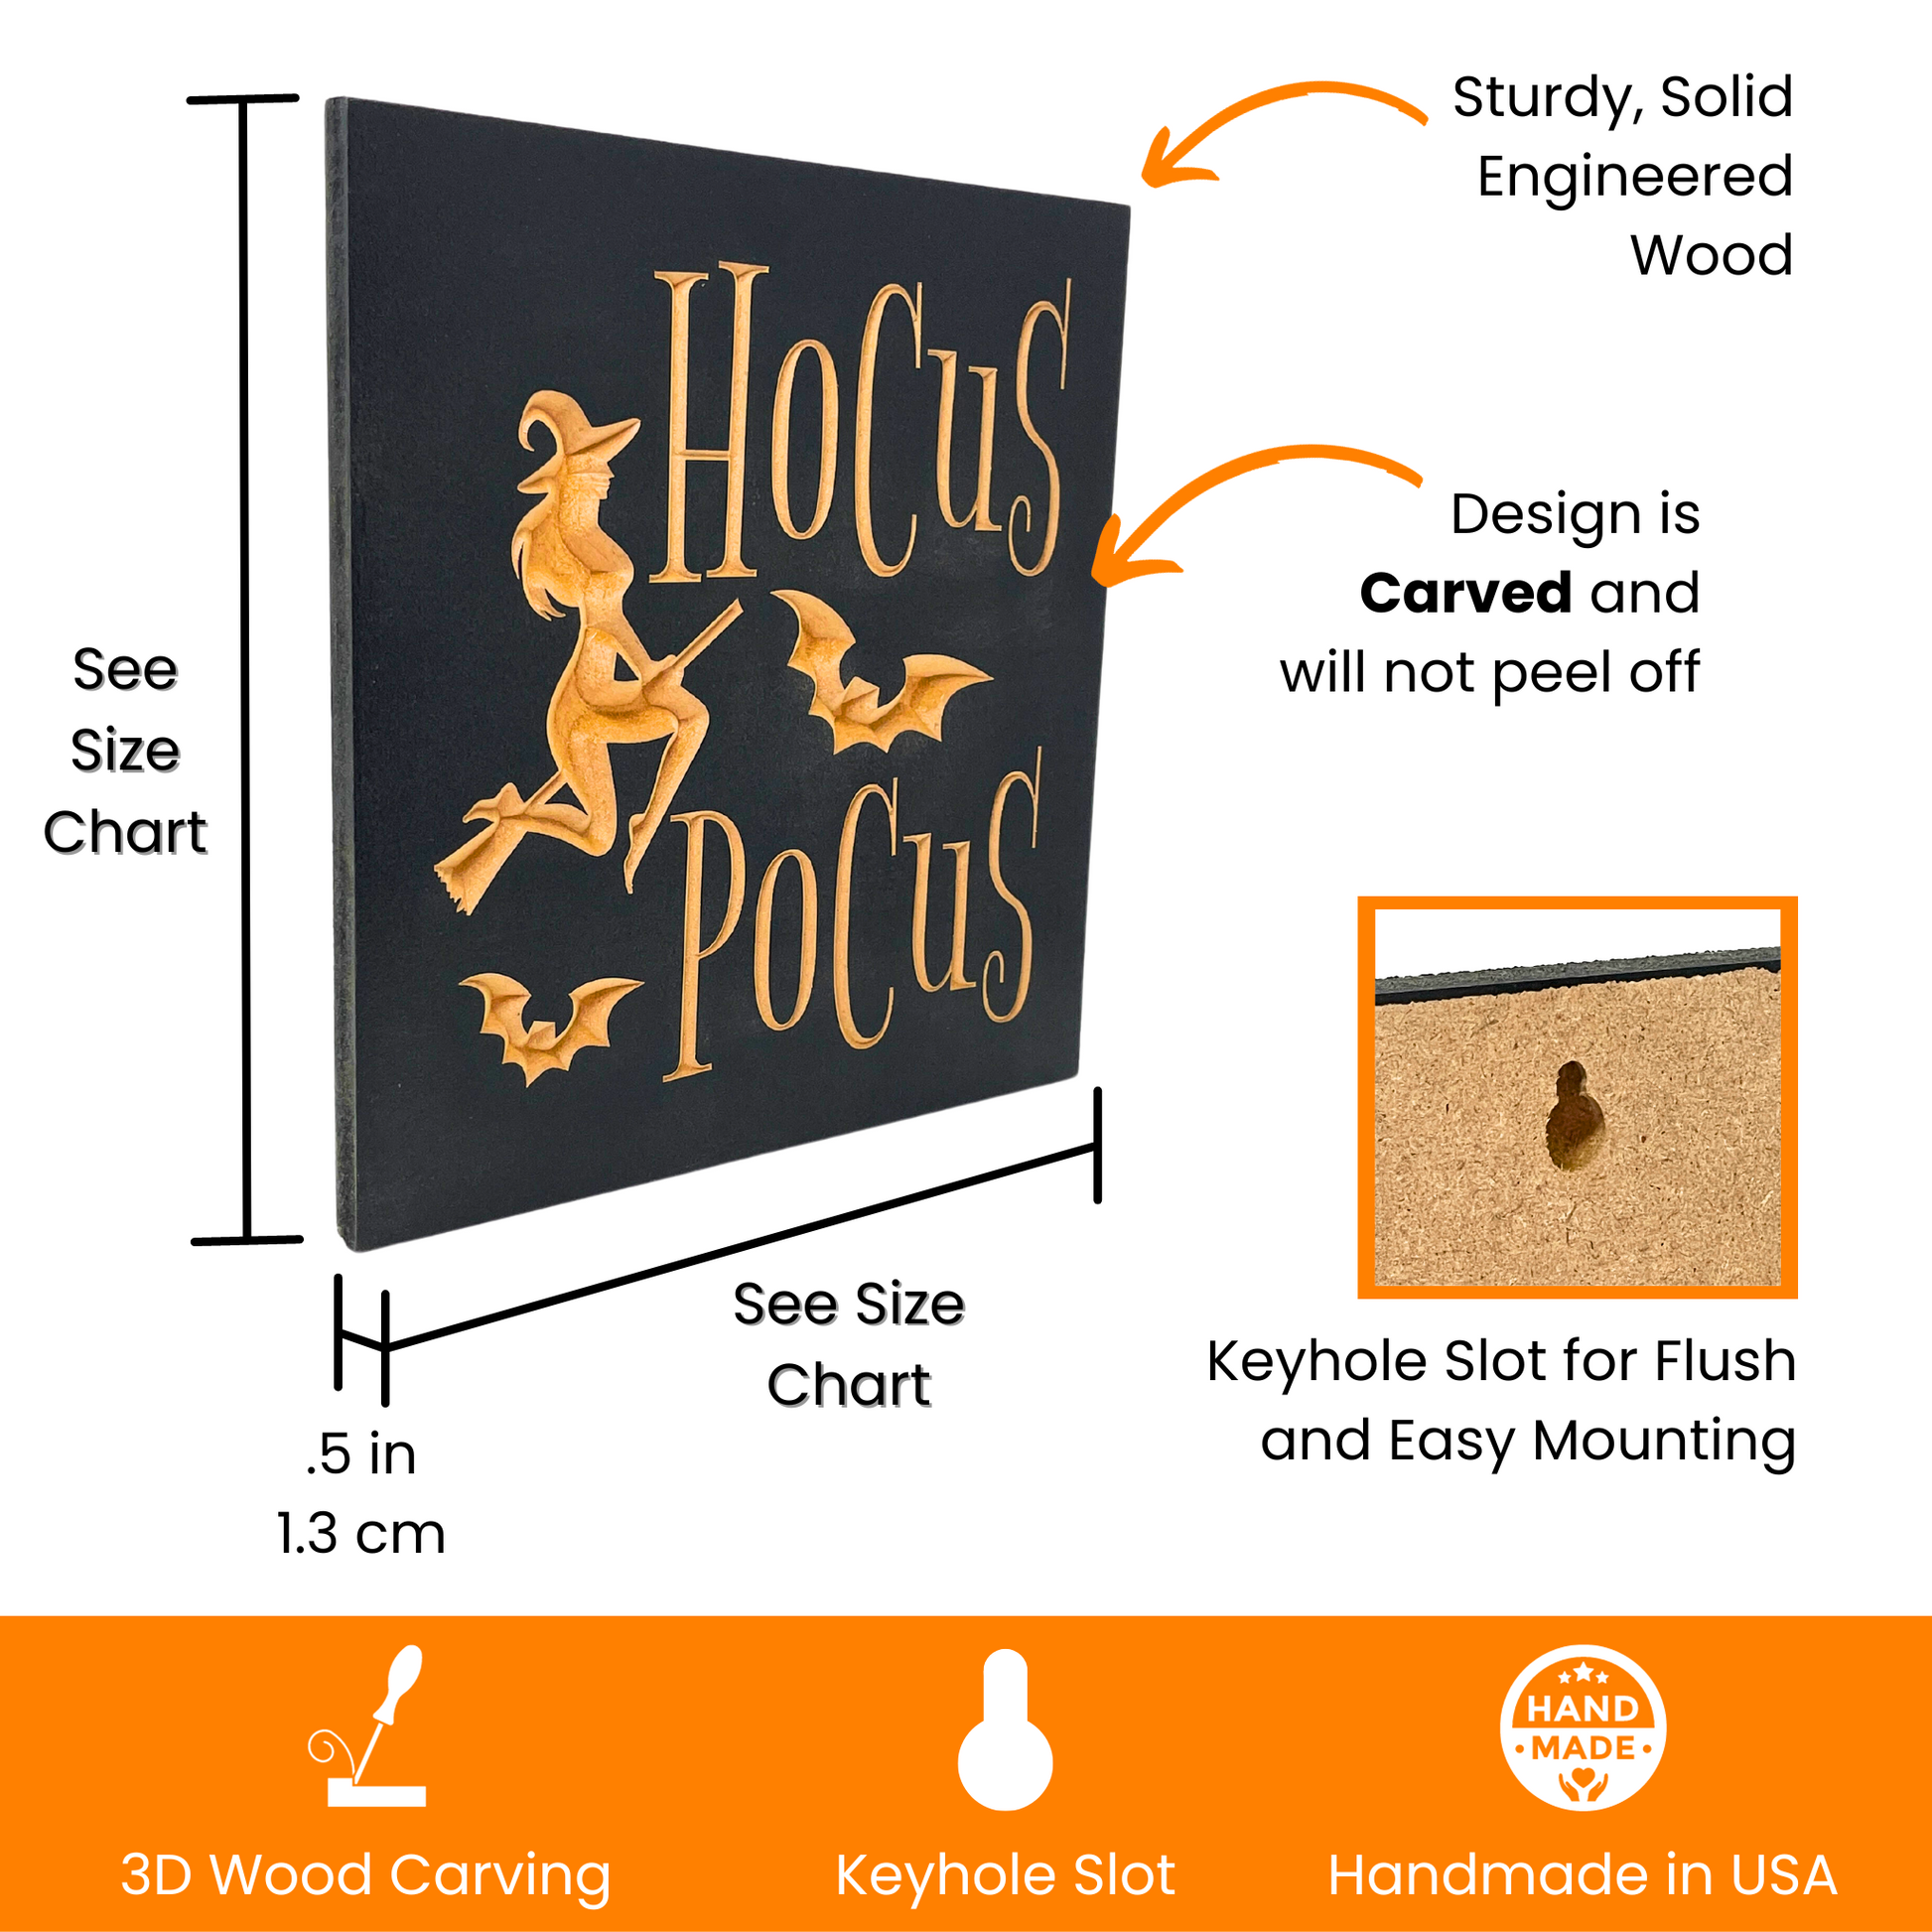 Hocus Pocus Carved Wooden Halloween Sign Product Details